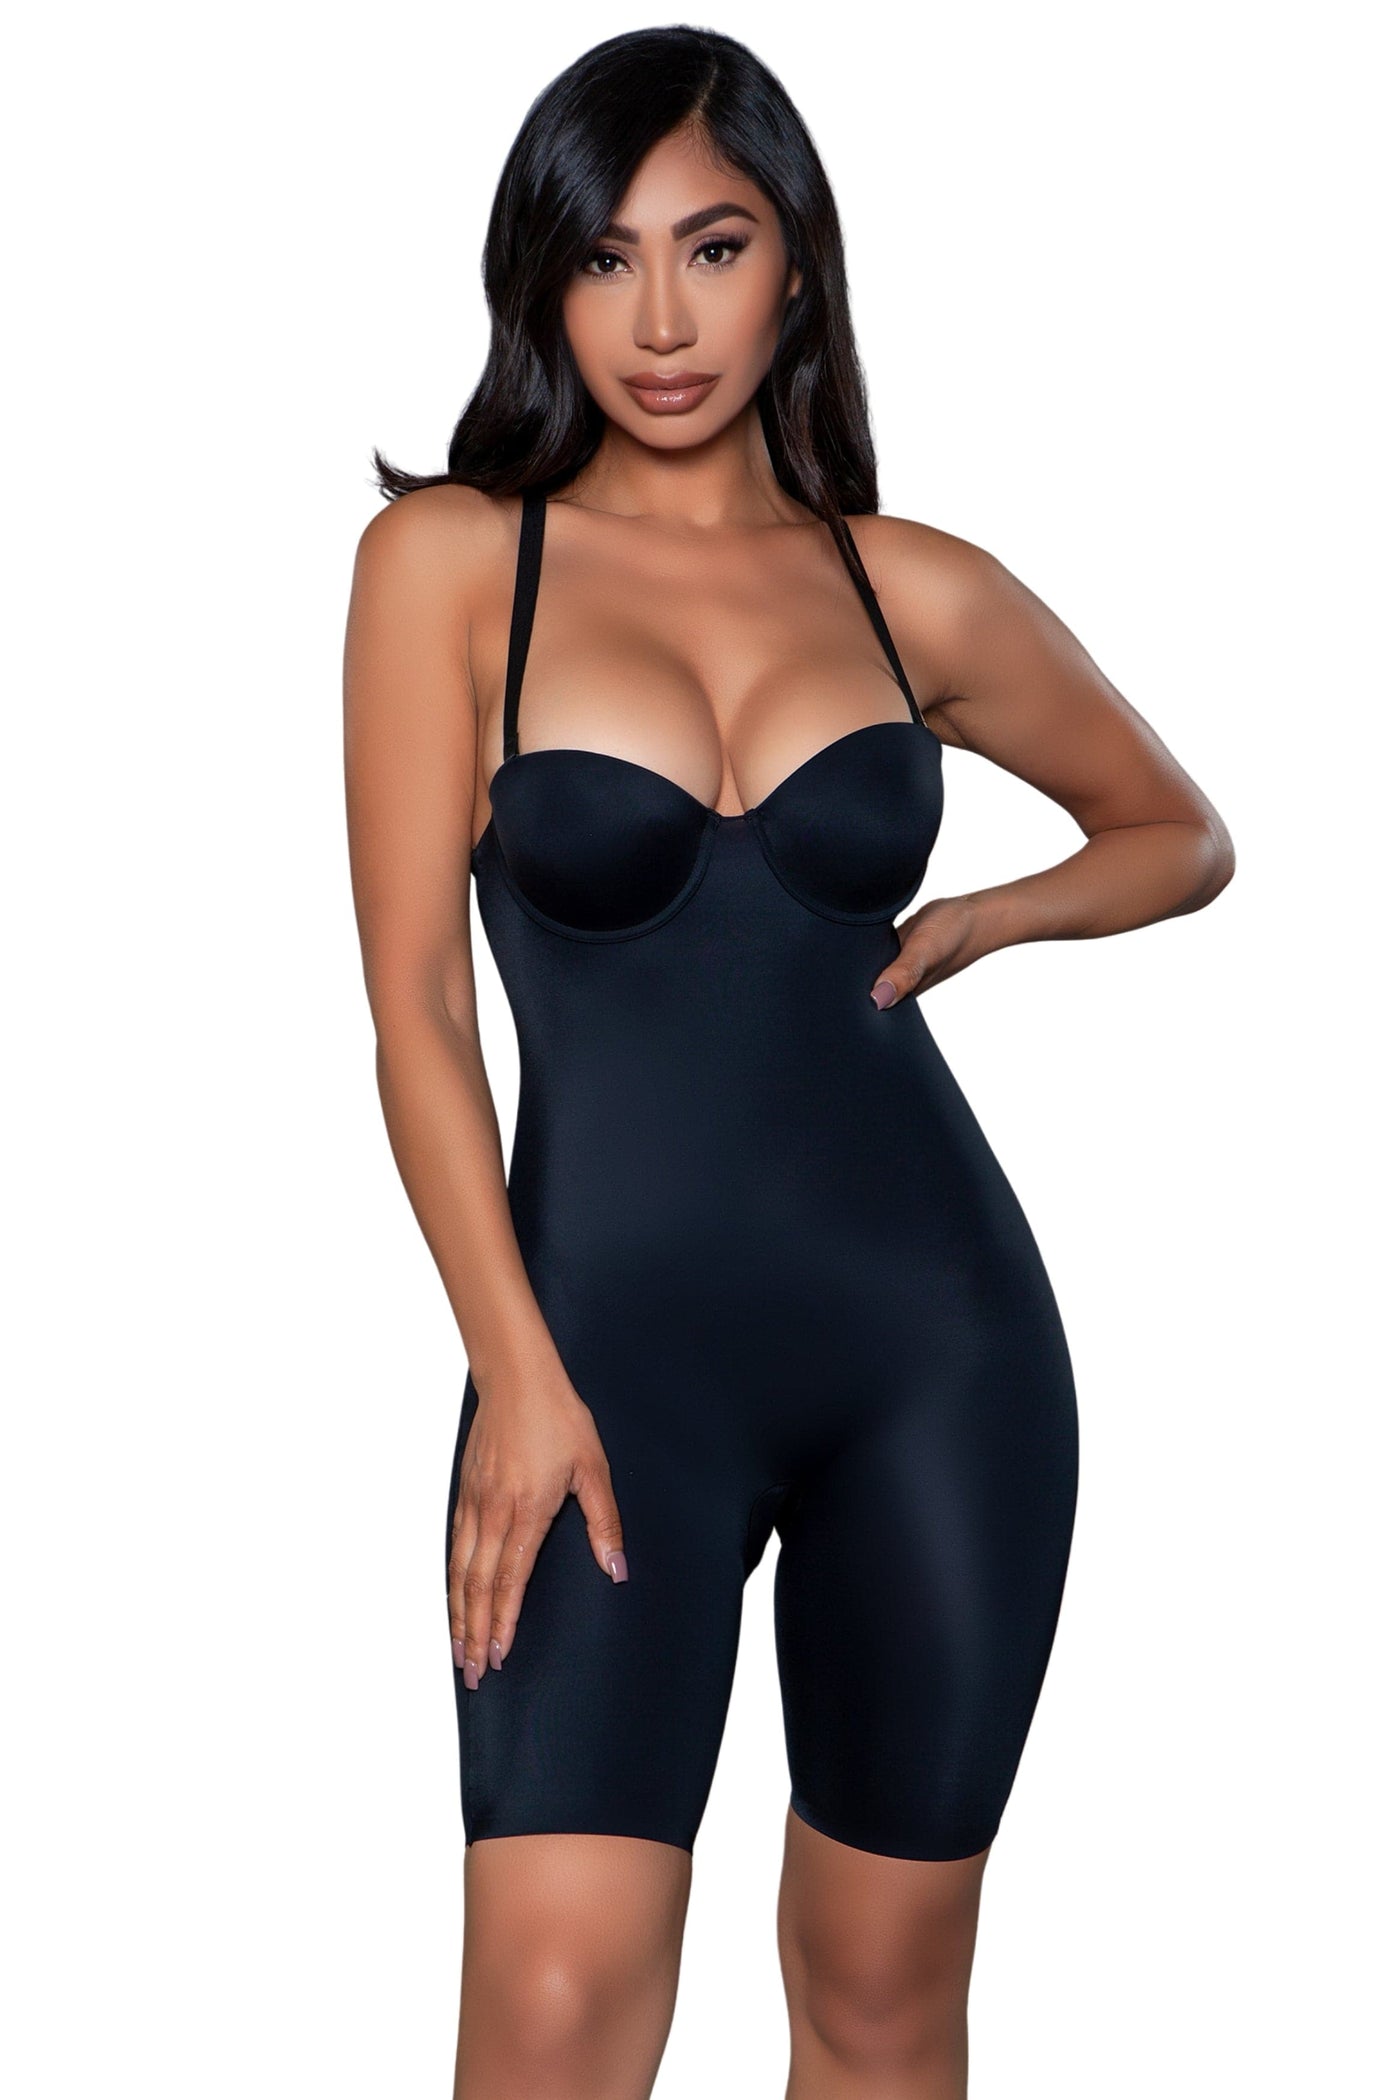 Multiway Strap Shapewear Suit - For Love of Lingerie